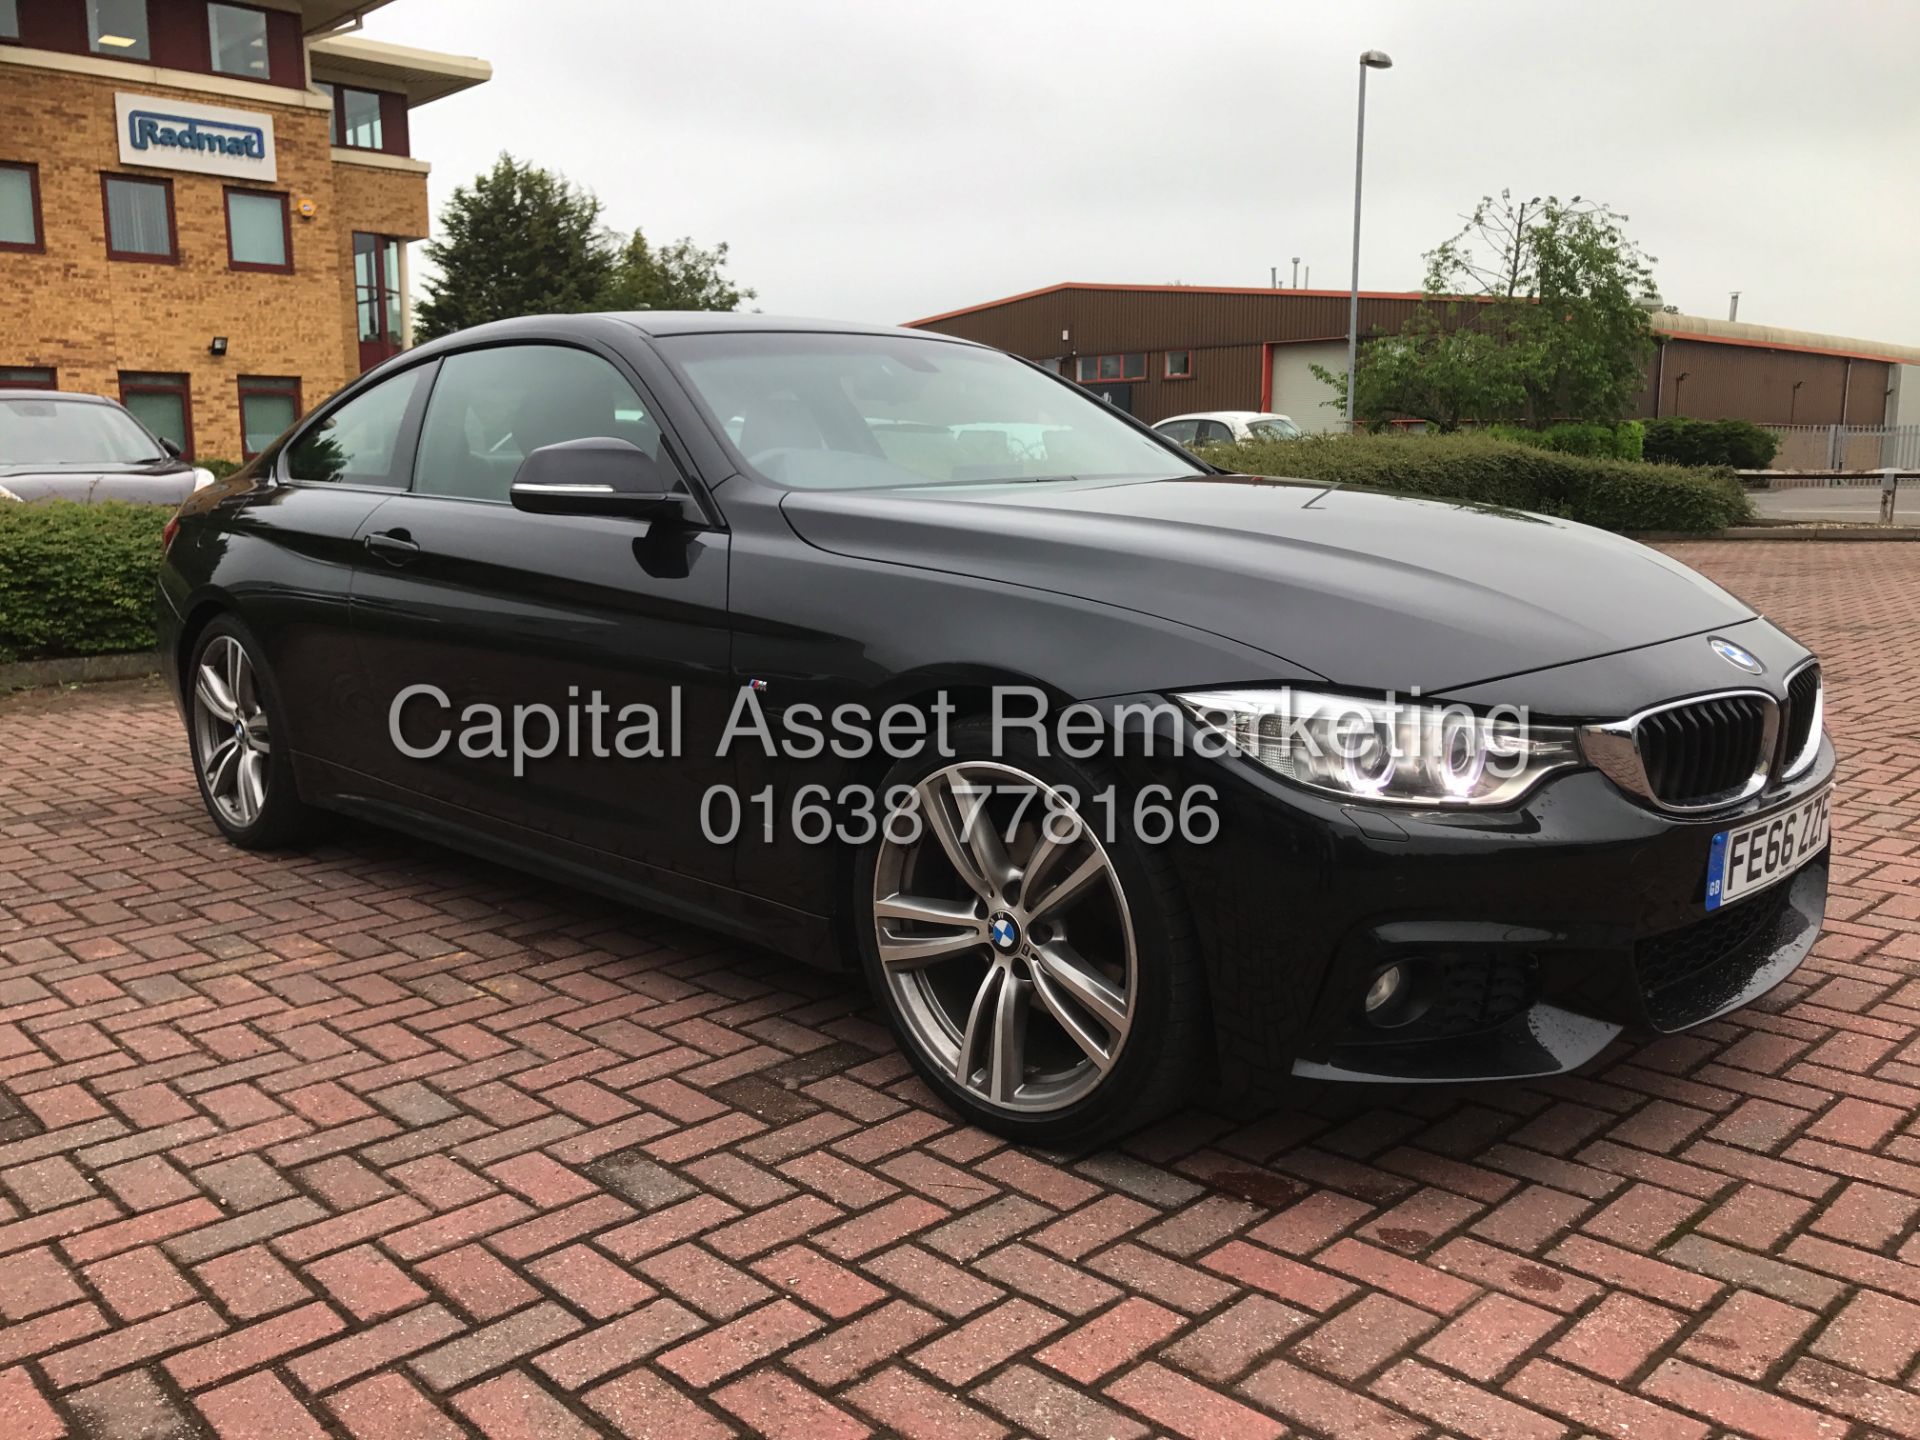 BMW 420D AUTO 8 SPEED "M-SPORT" COUPE (2017 MODEL) 1 OWNER WITH BMW HISTORY - SAT NAV - I DRIVE - Image 2 of 25